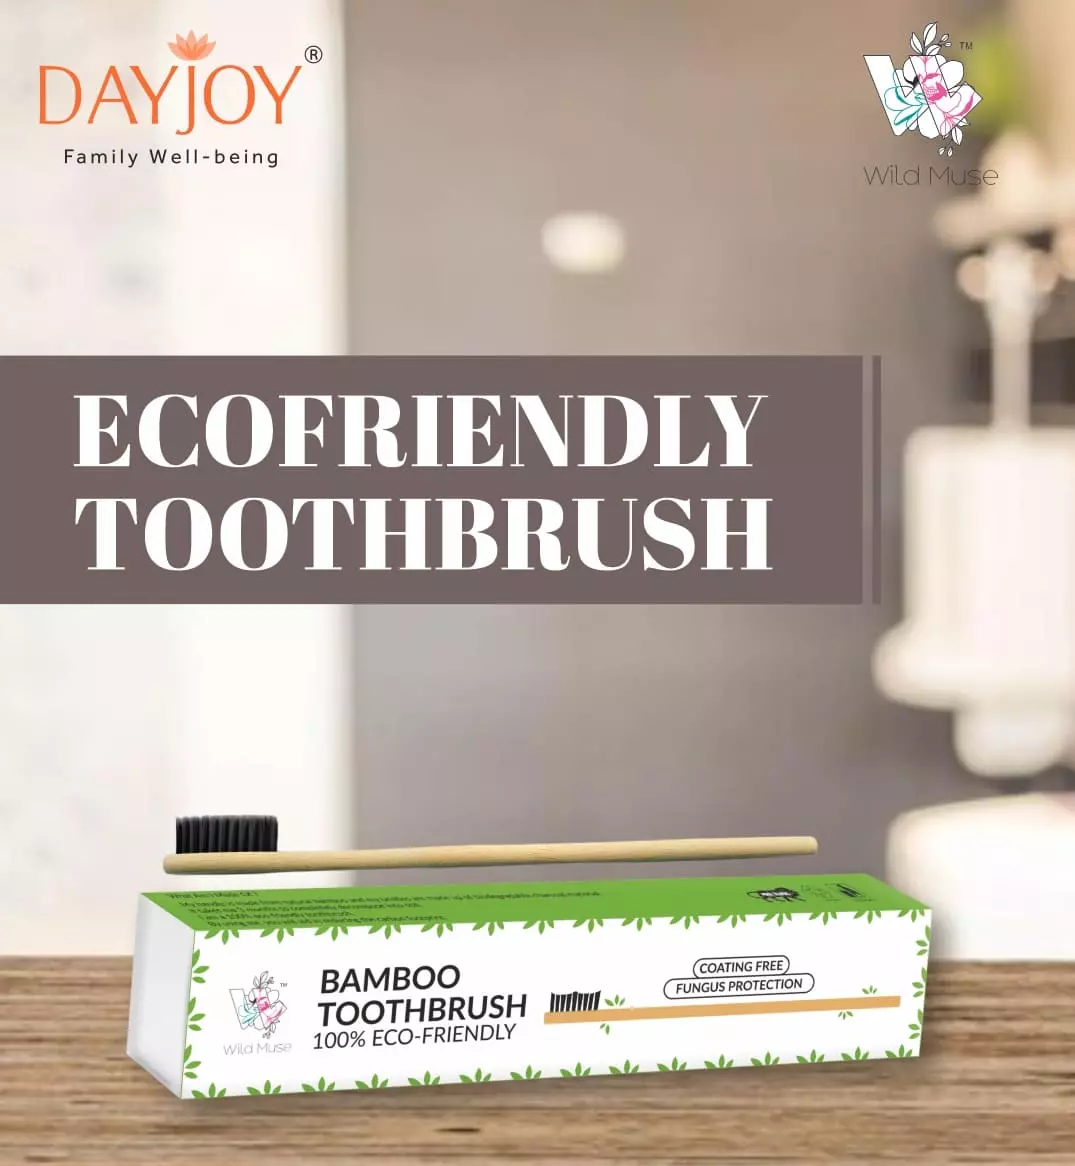 Ecofriendly Toothbrush- best for teeth and the environment